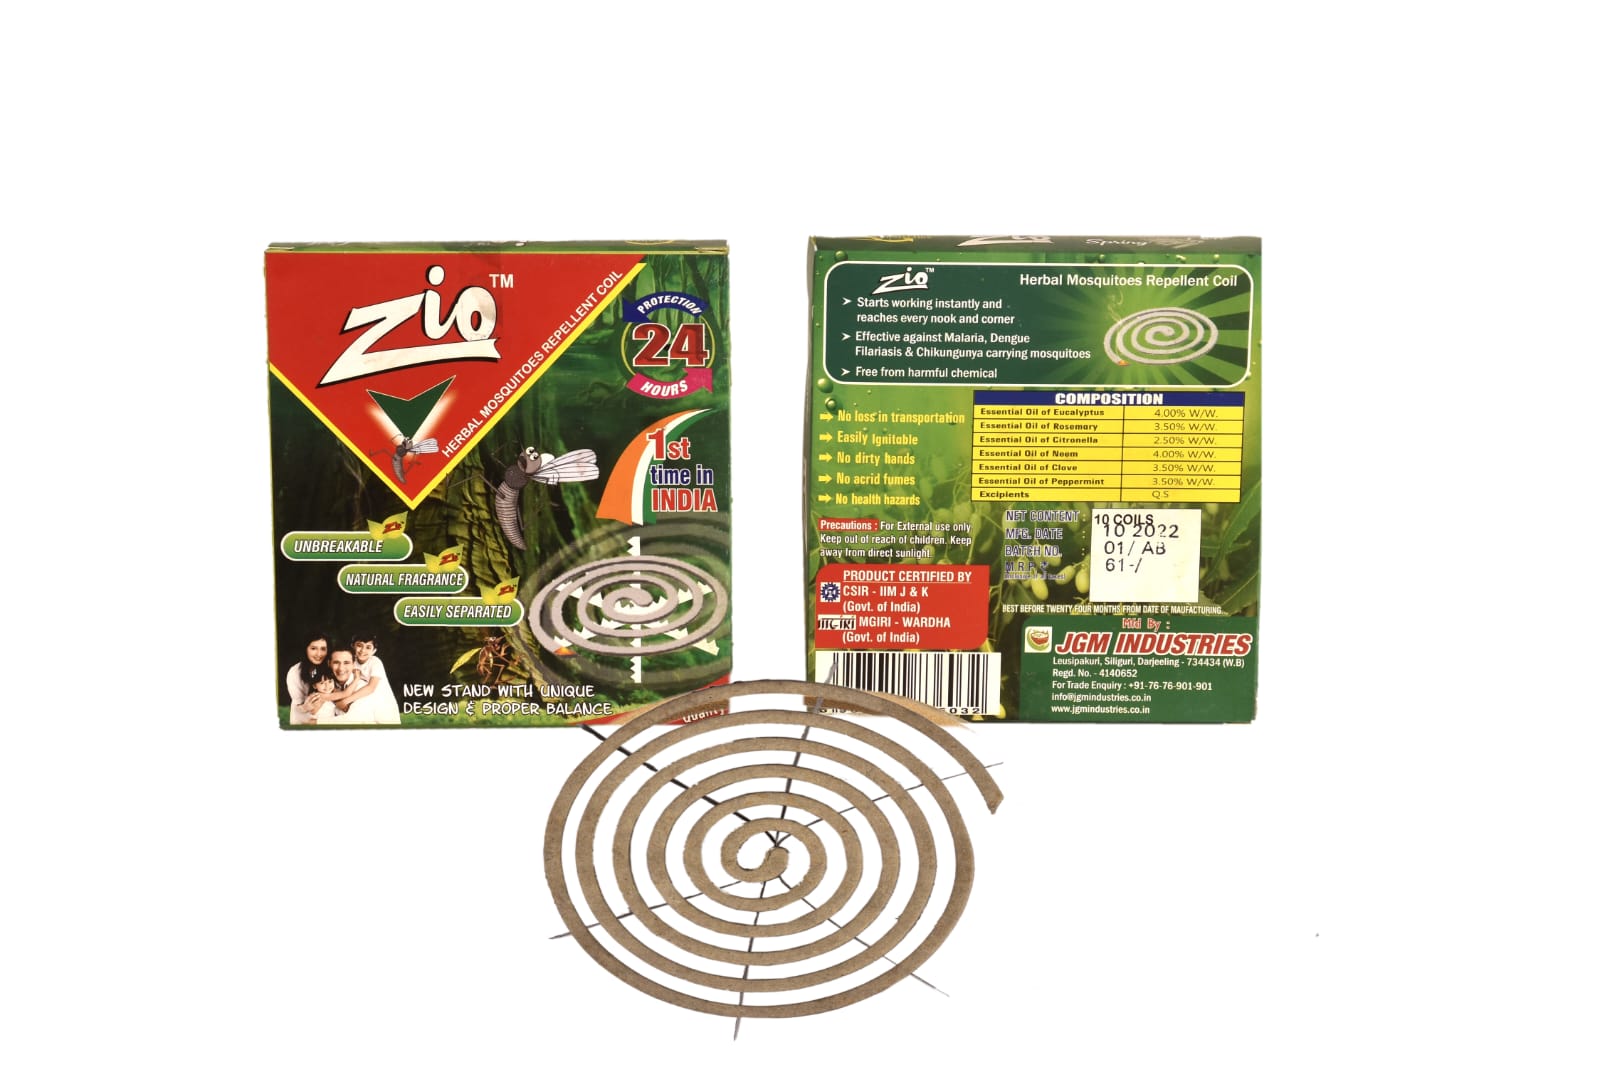 JGM Herbal Mosquitoes Repellent Spring Coil